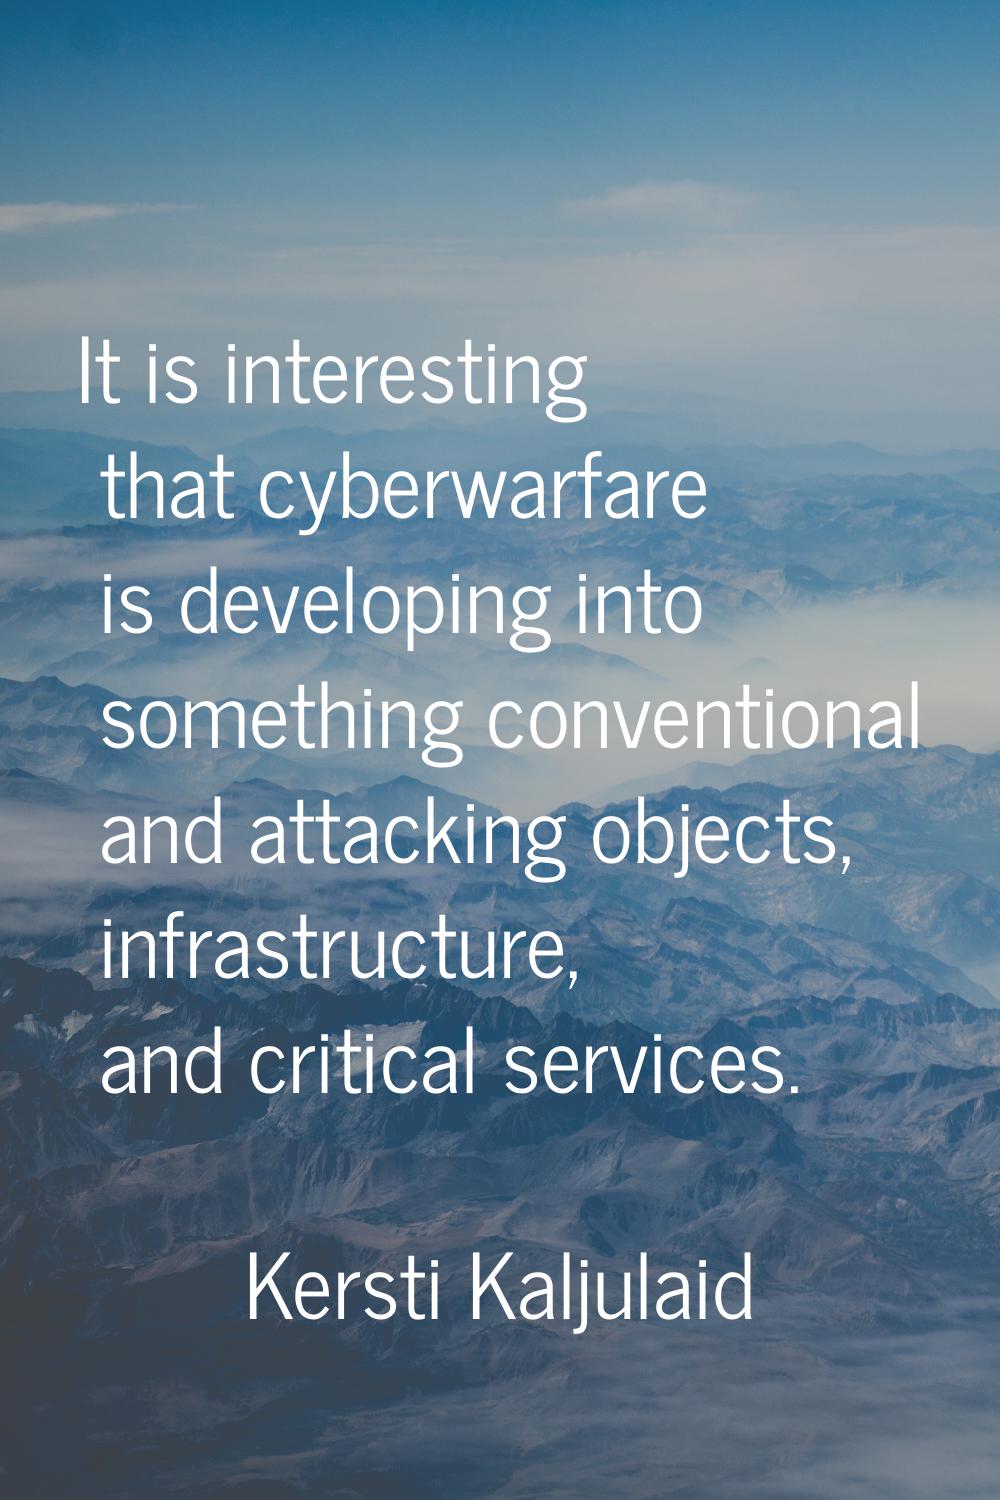 It is interesting that cyberwarfare is developing into something conventional and attacking objects